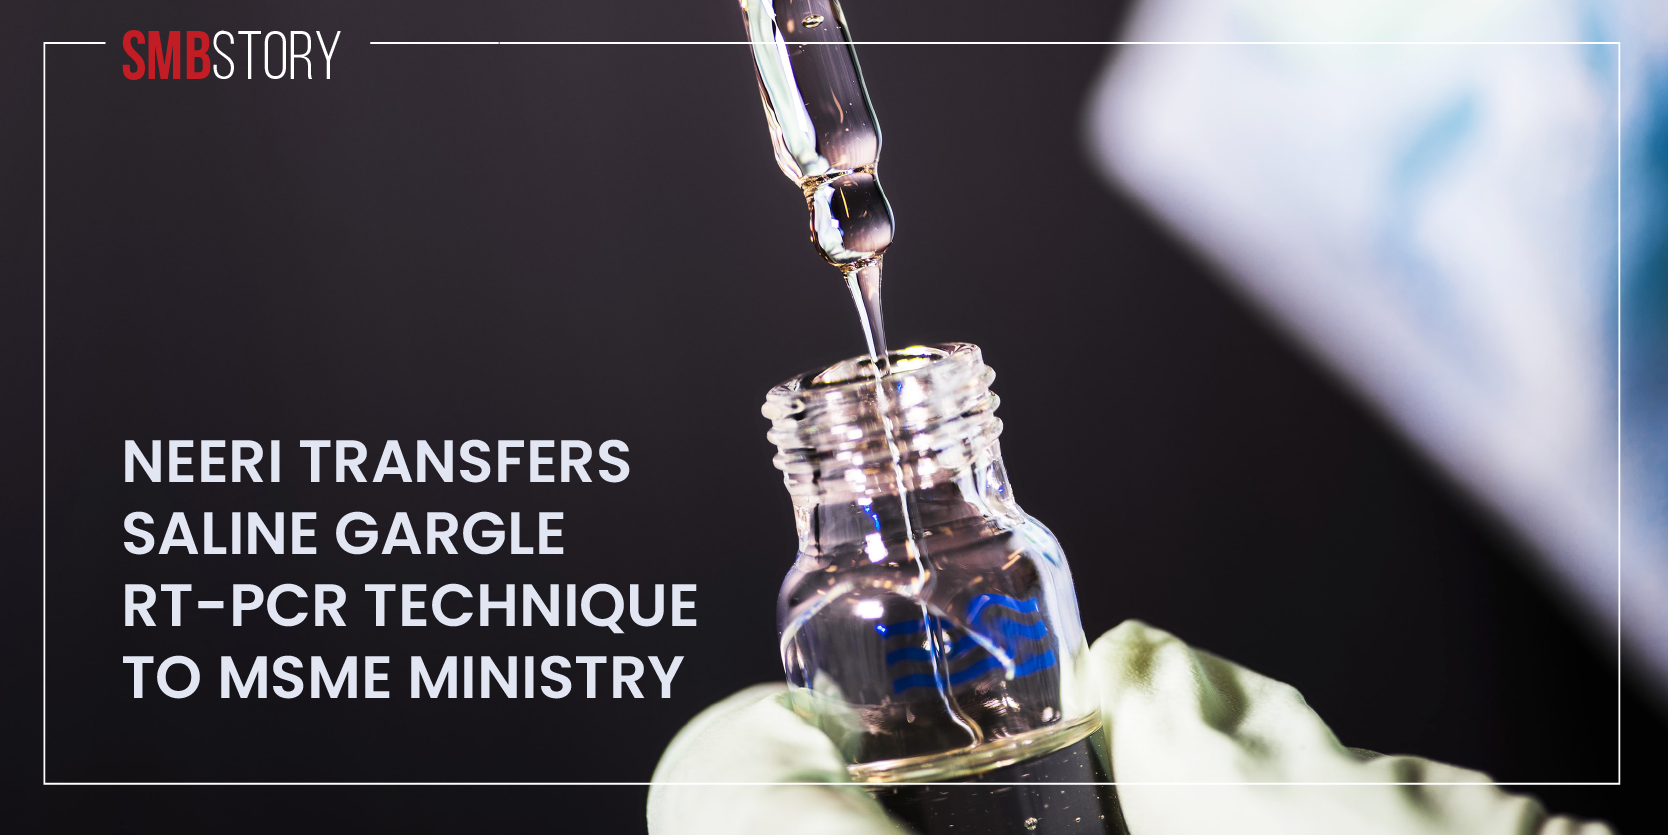 CSIR-NEERI transfers saline gargle RT-PCR technique to MSME ministry for commercialisation